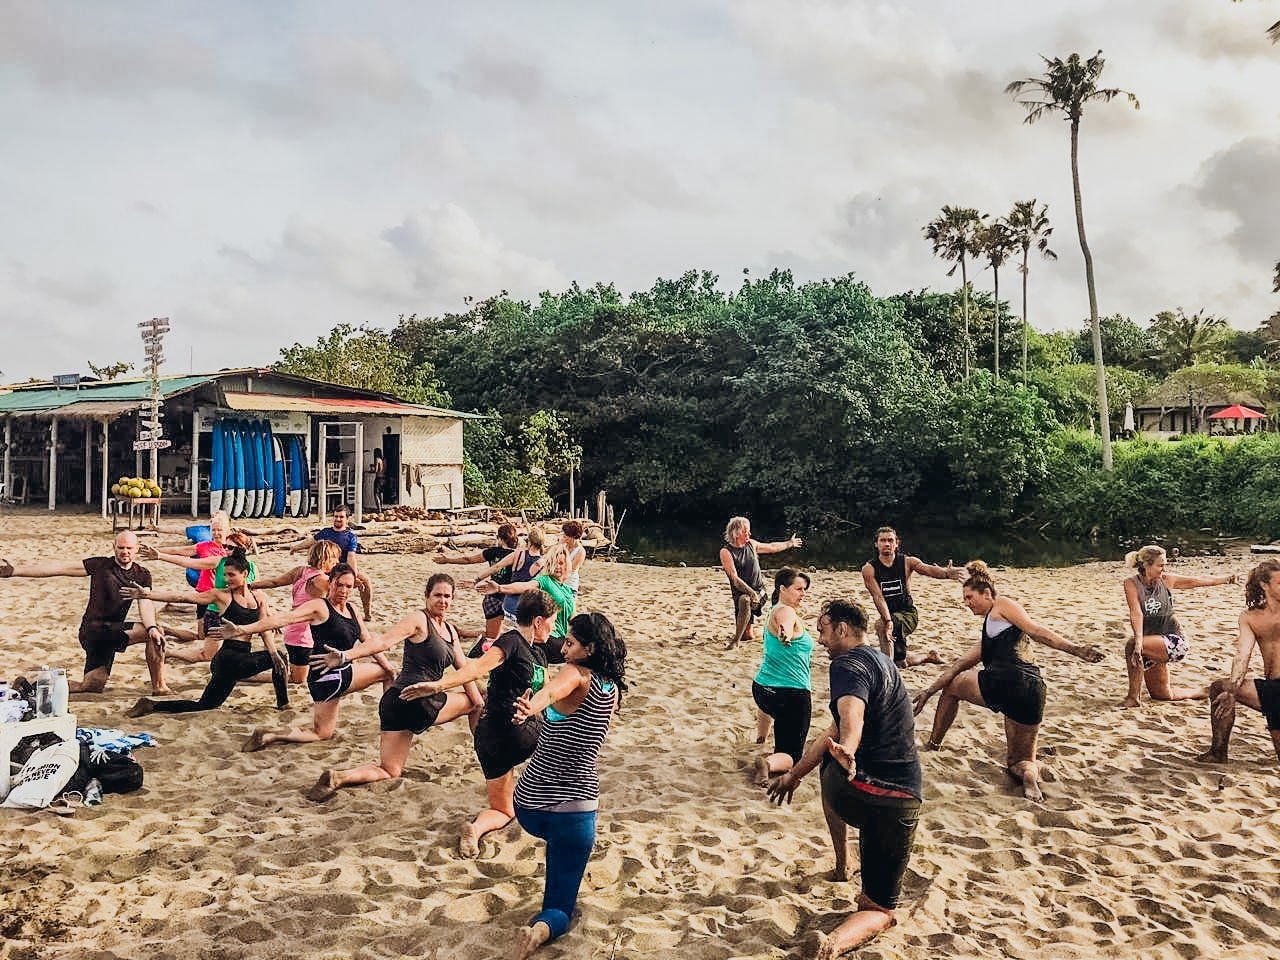 A group taking part in a HIIT workout on the beach in Bali, Indonesia 